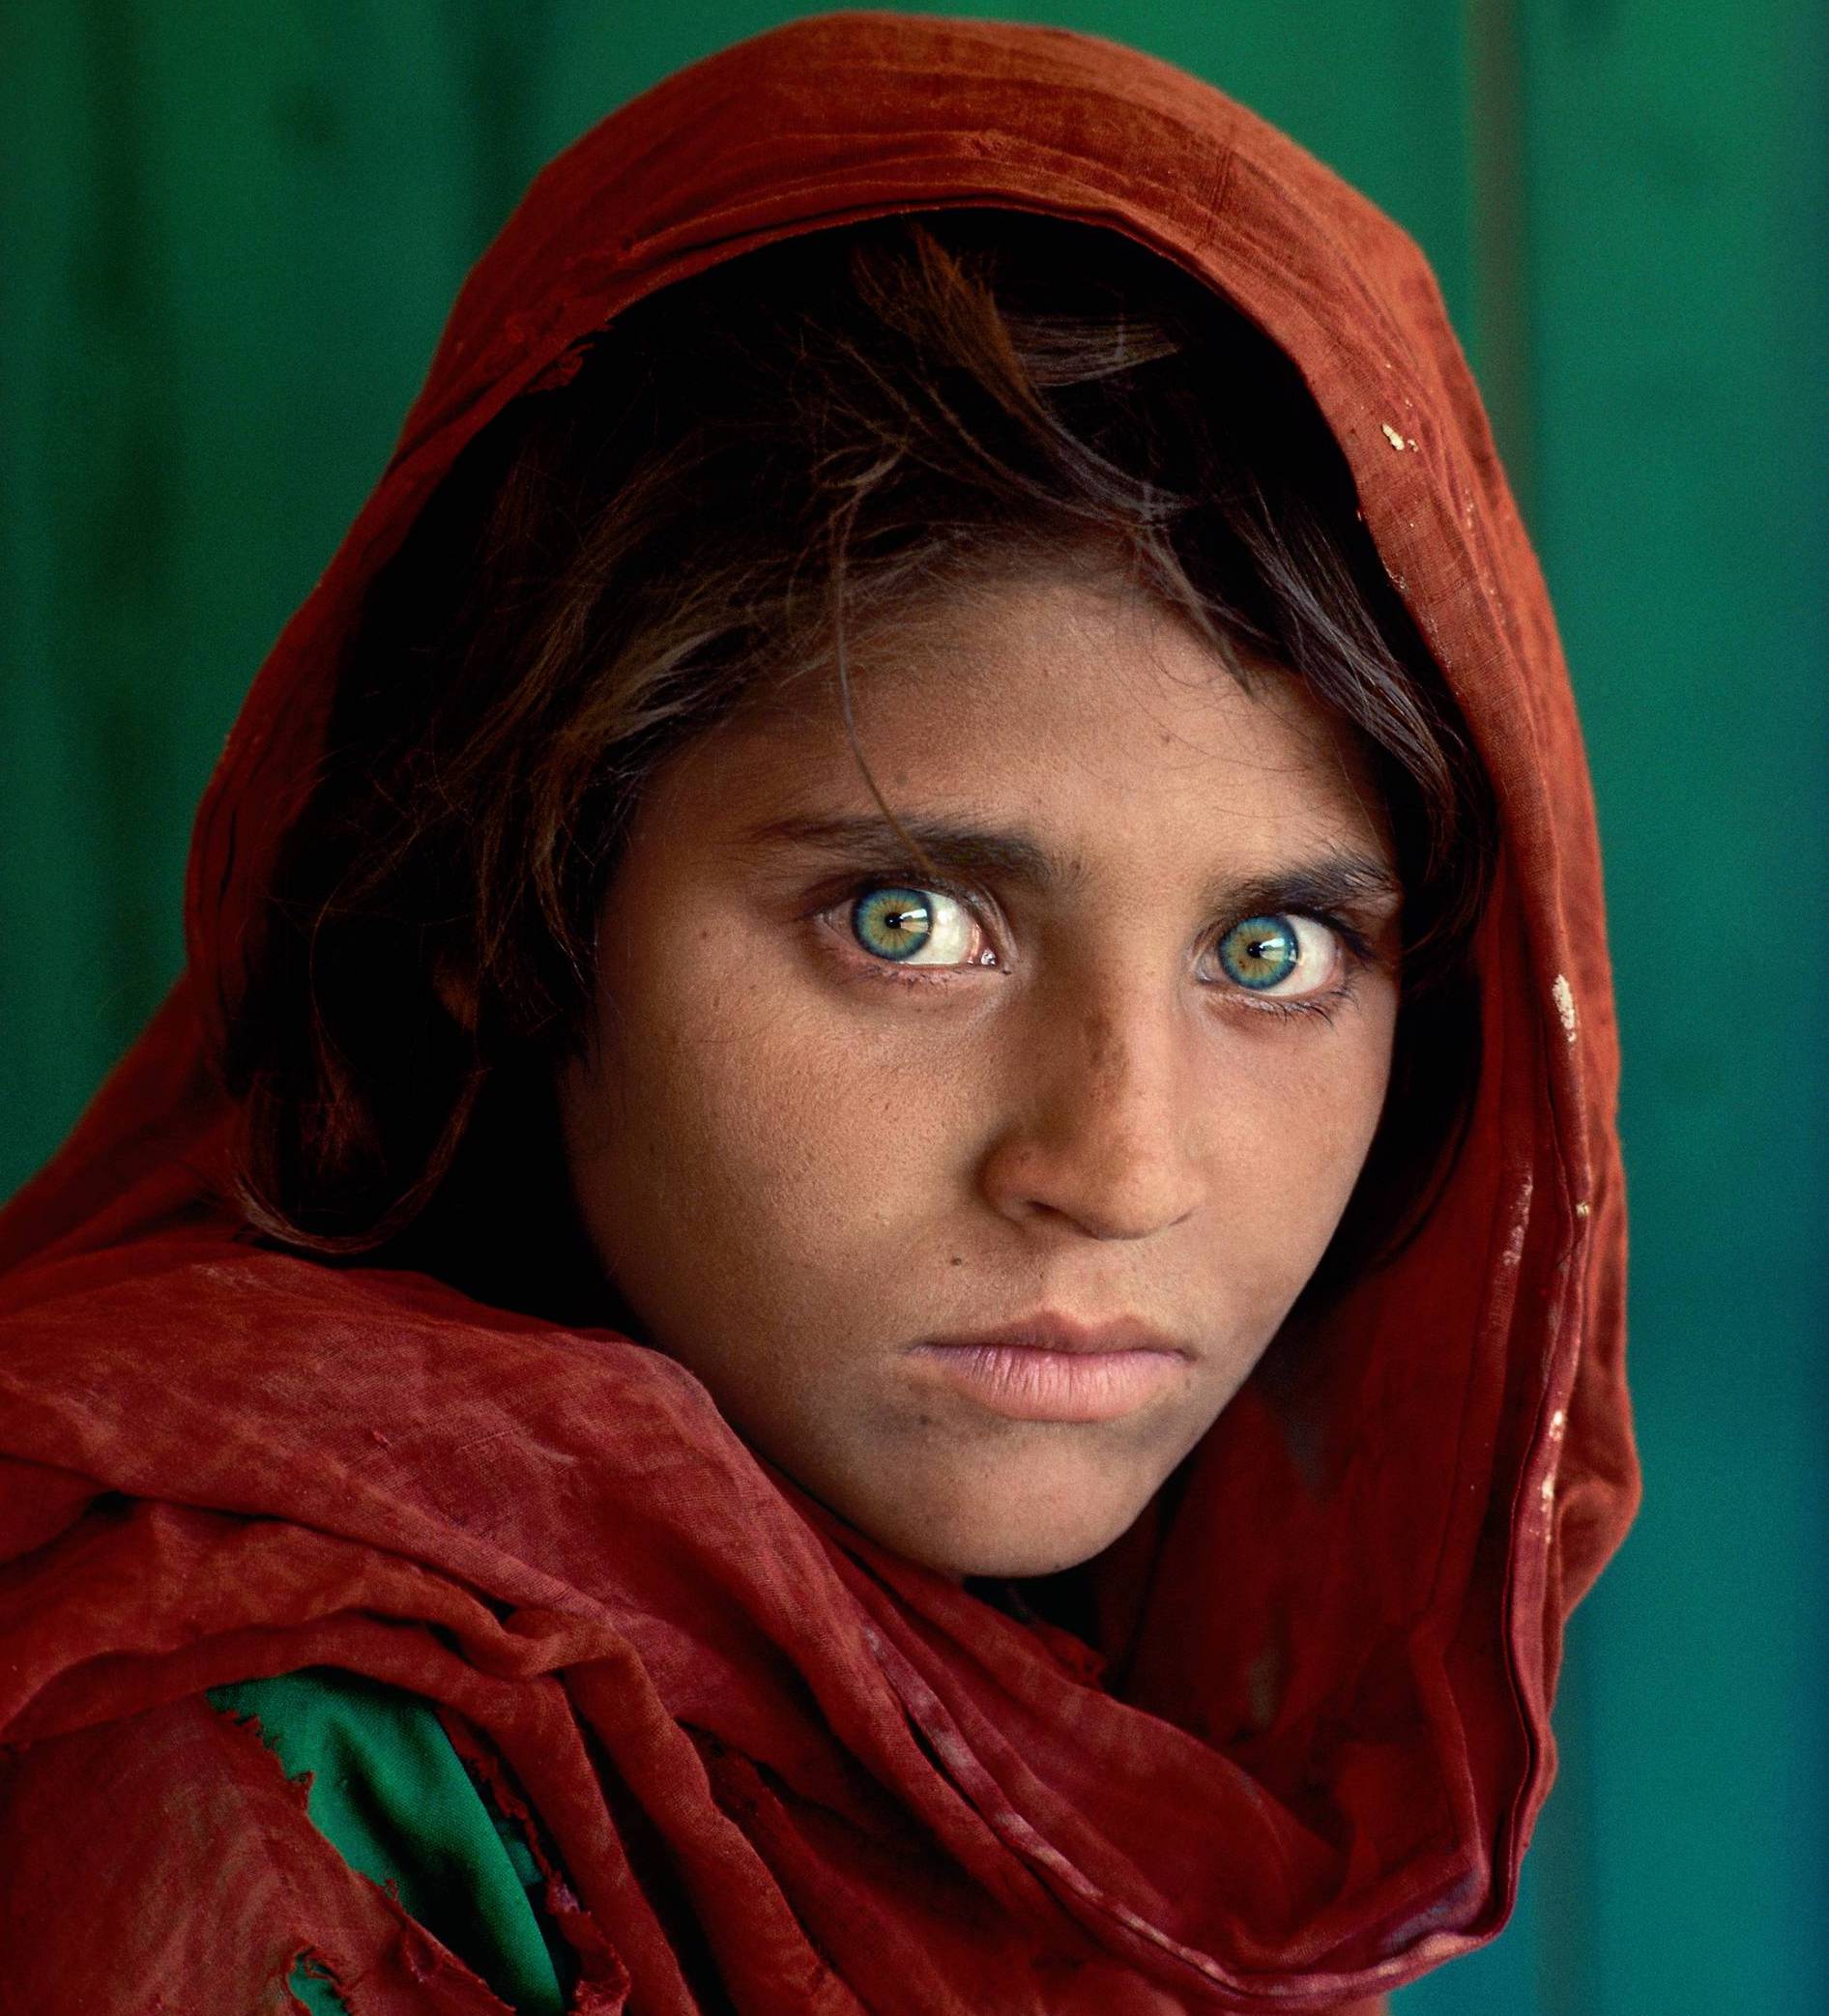 Renowned Photographer Steve McCurry Brings ICONS Exhibition To Chicago